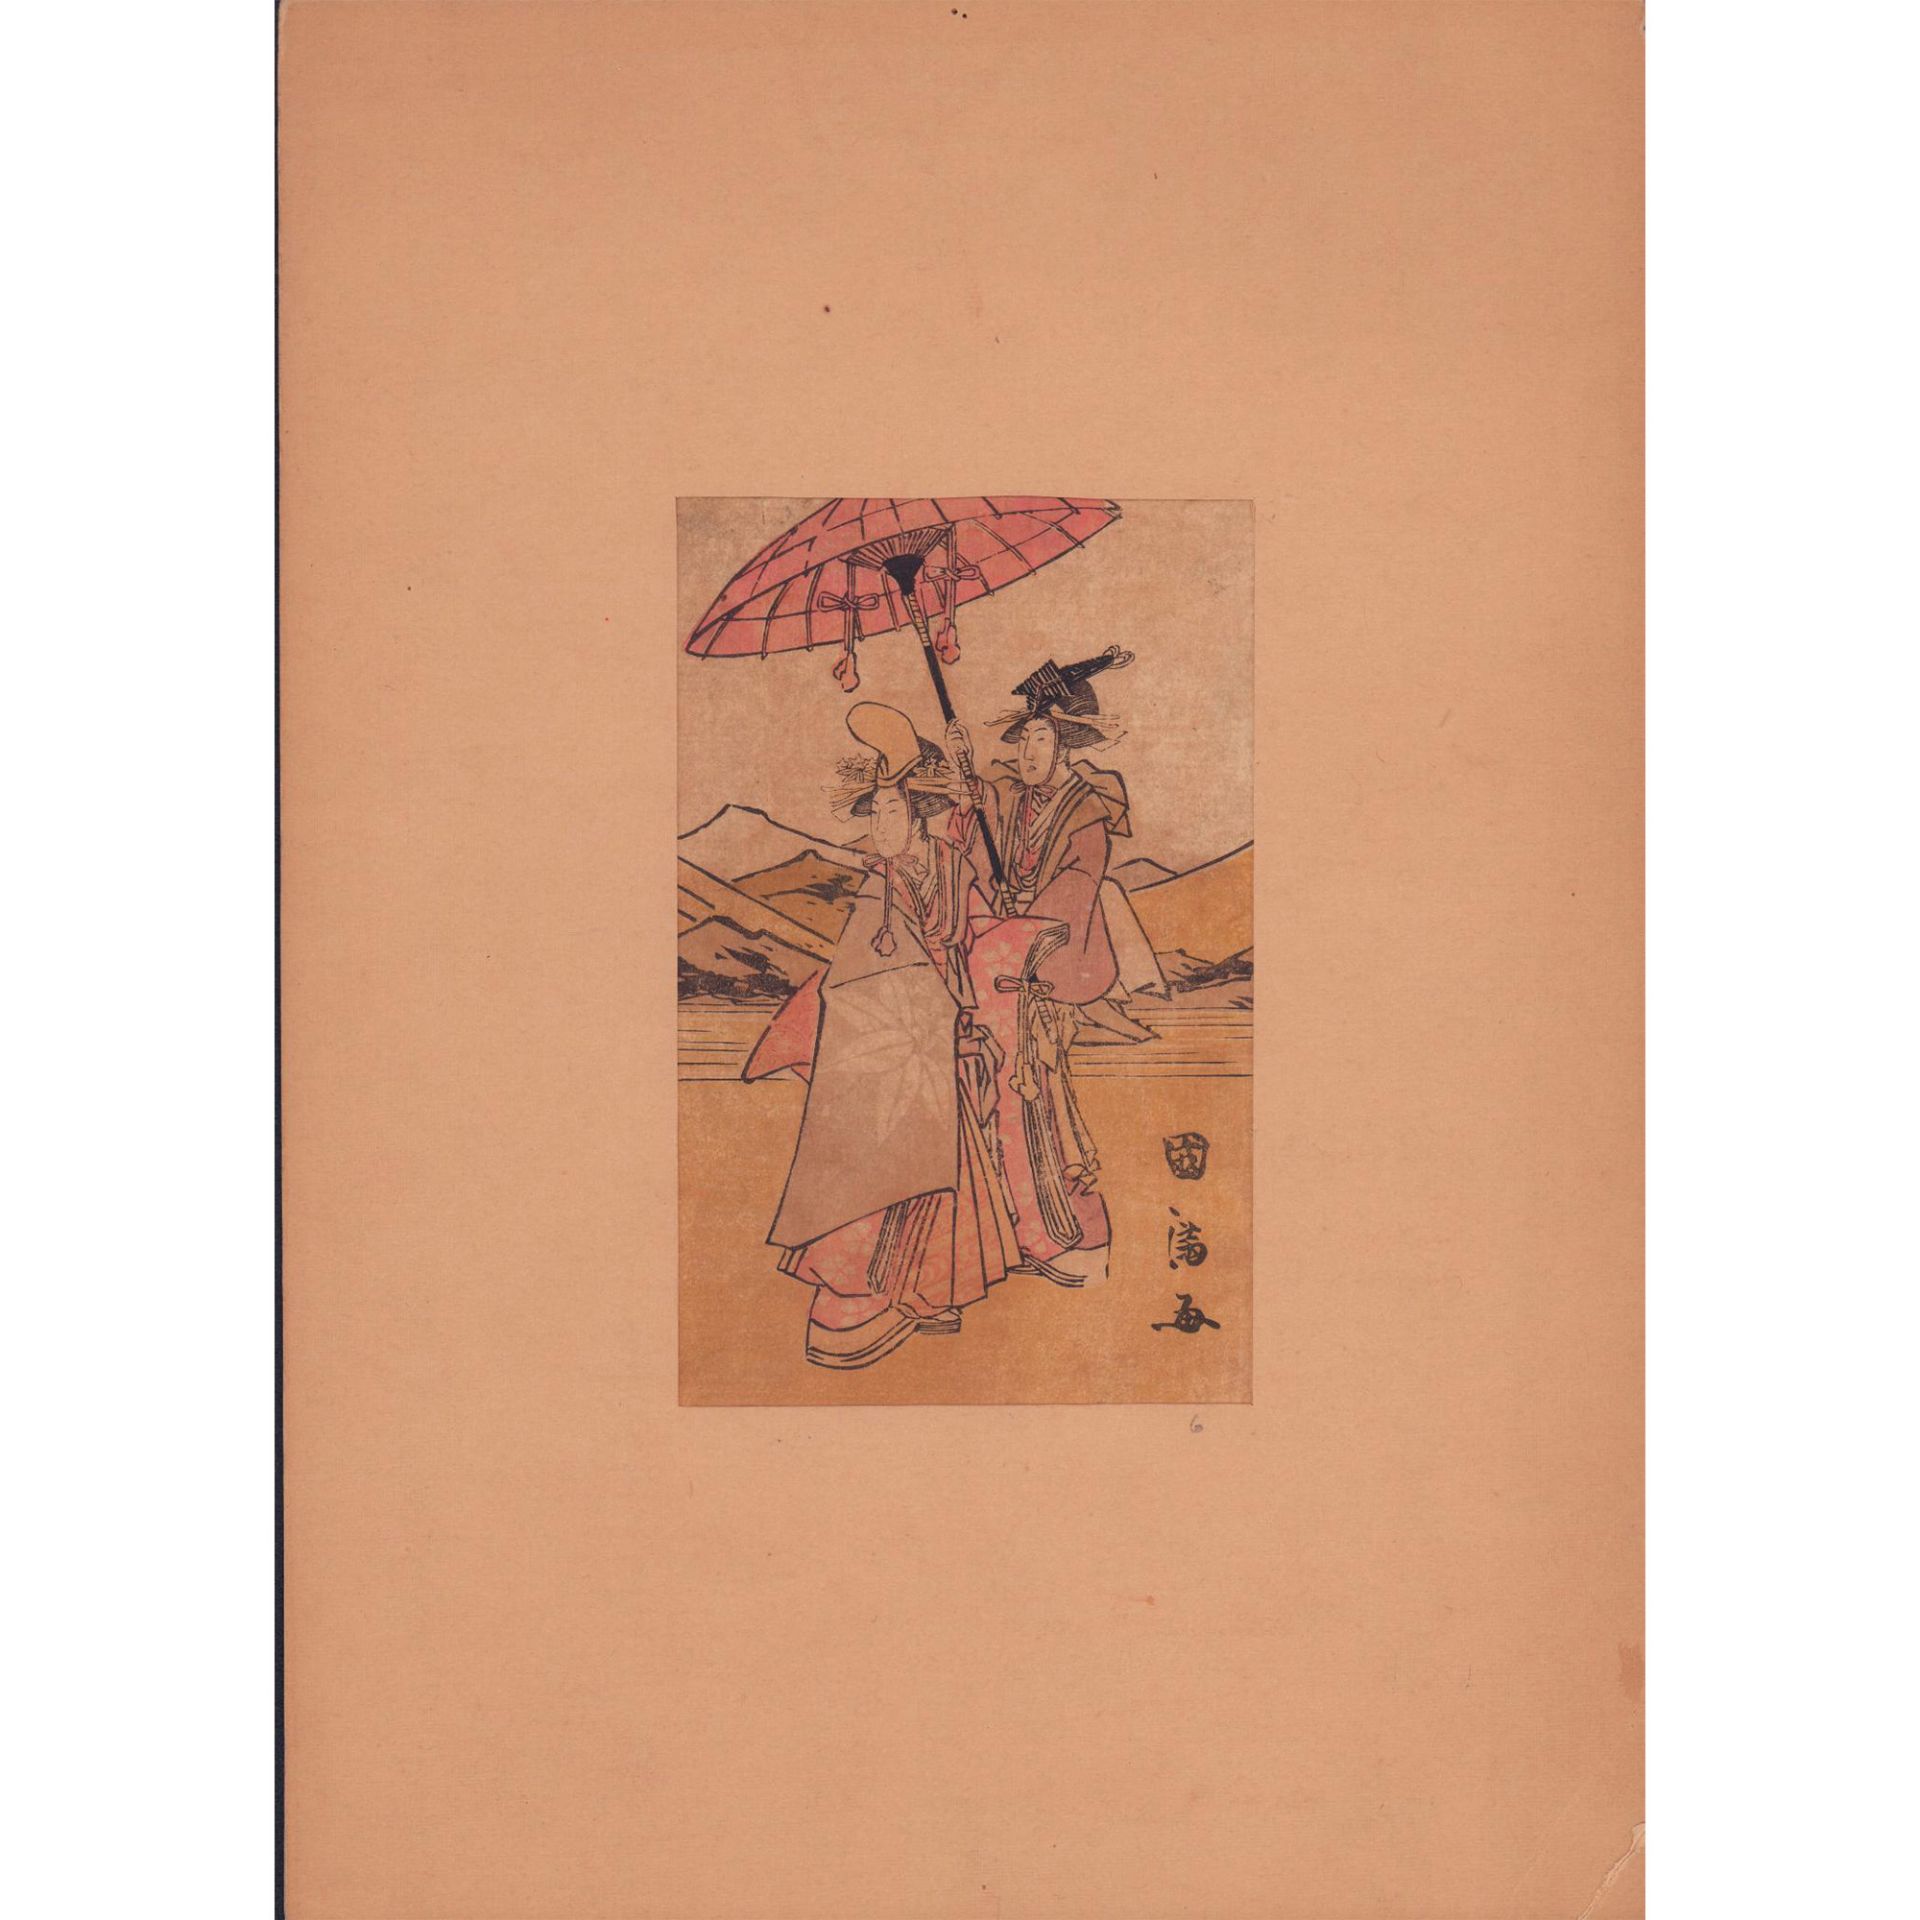 Japanese Woodblock Print, Couple With an Umbrella